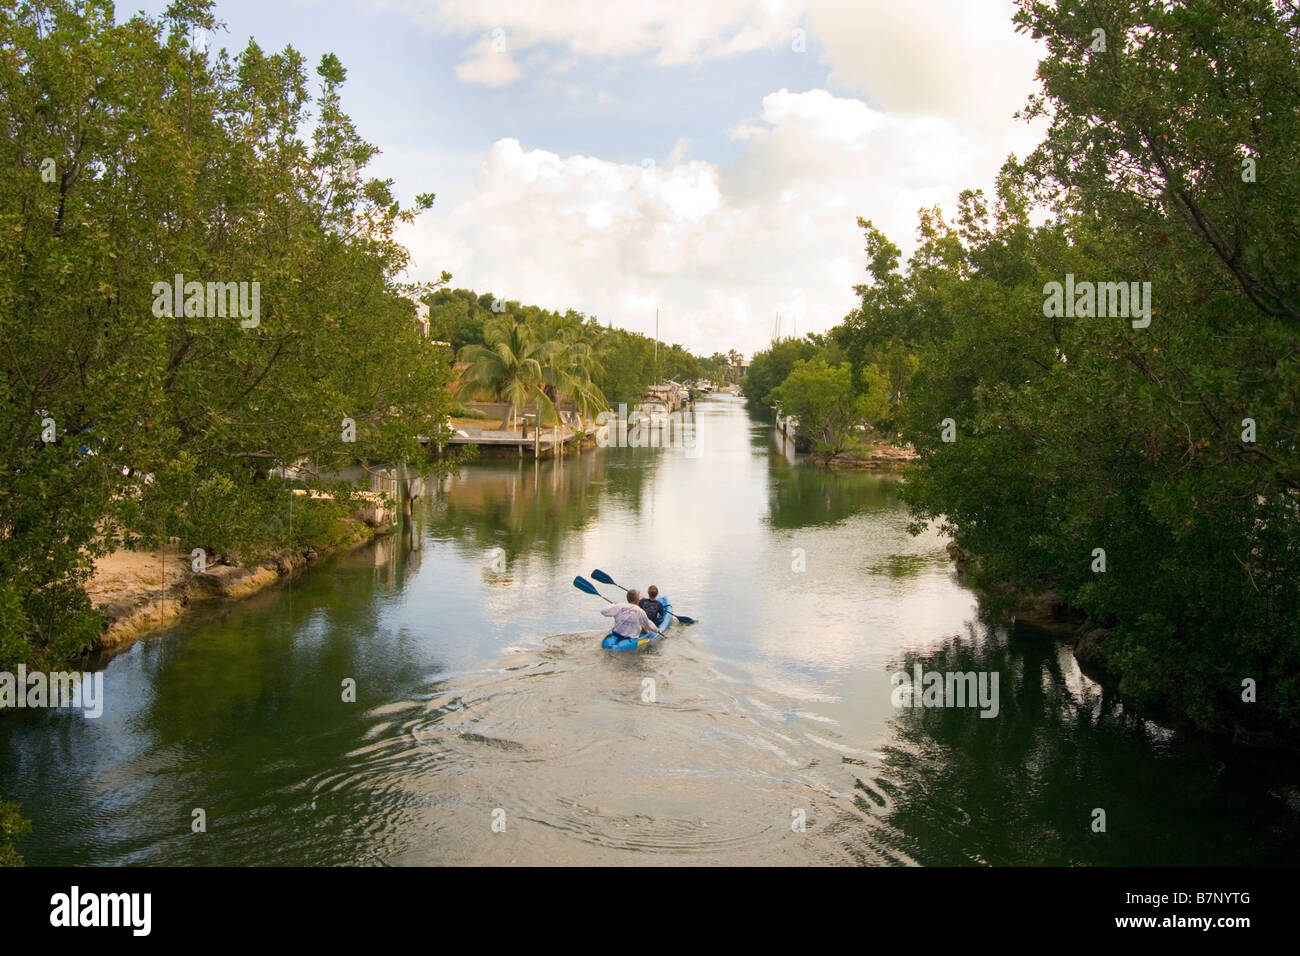 kayaking in the canals of key largo Stock Photo